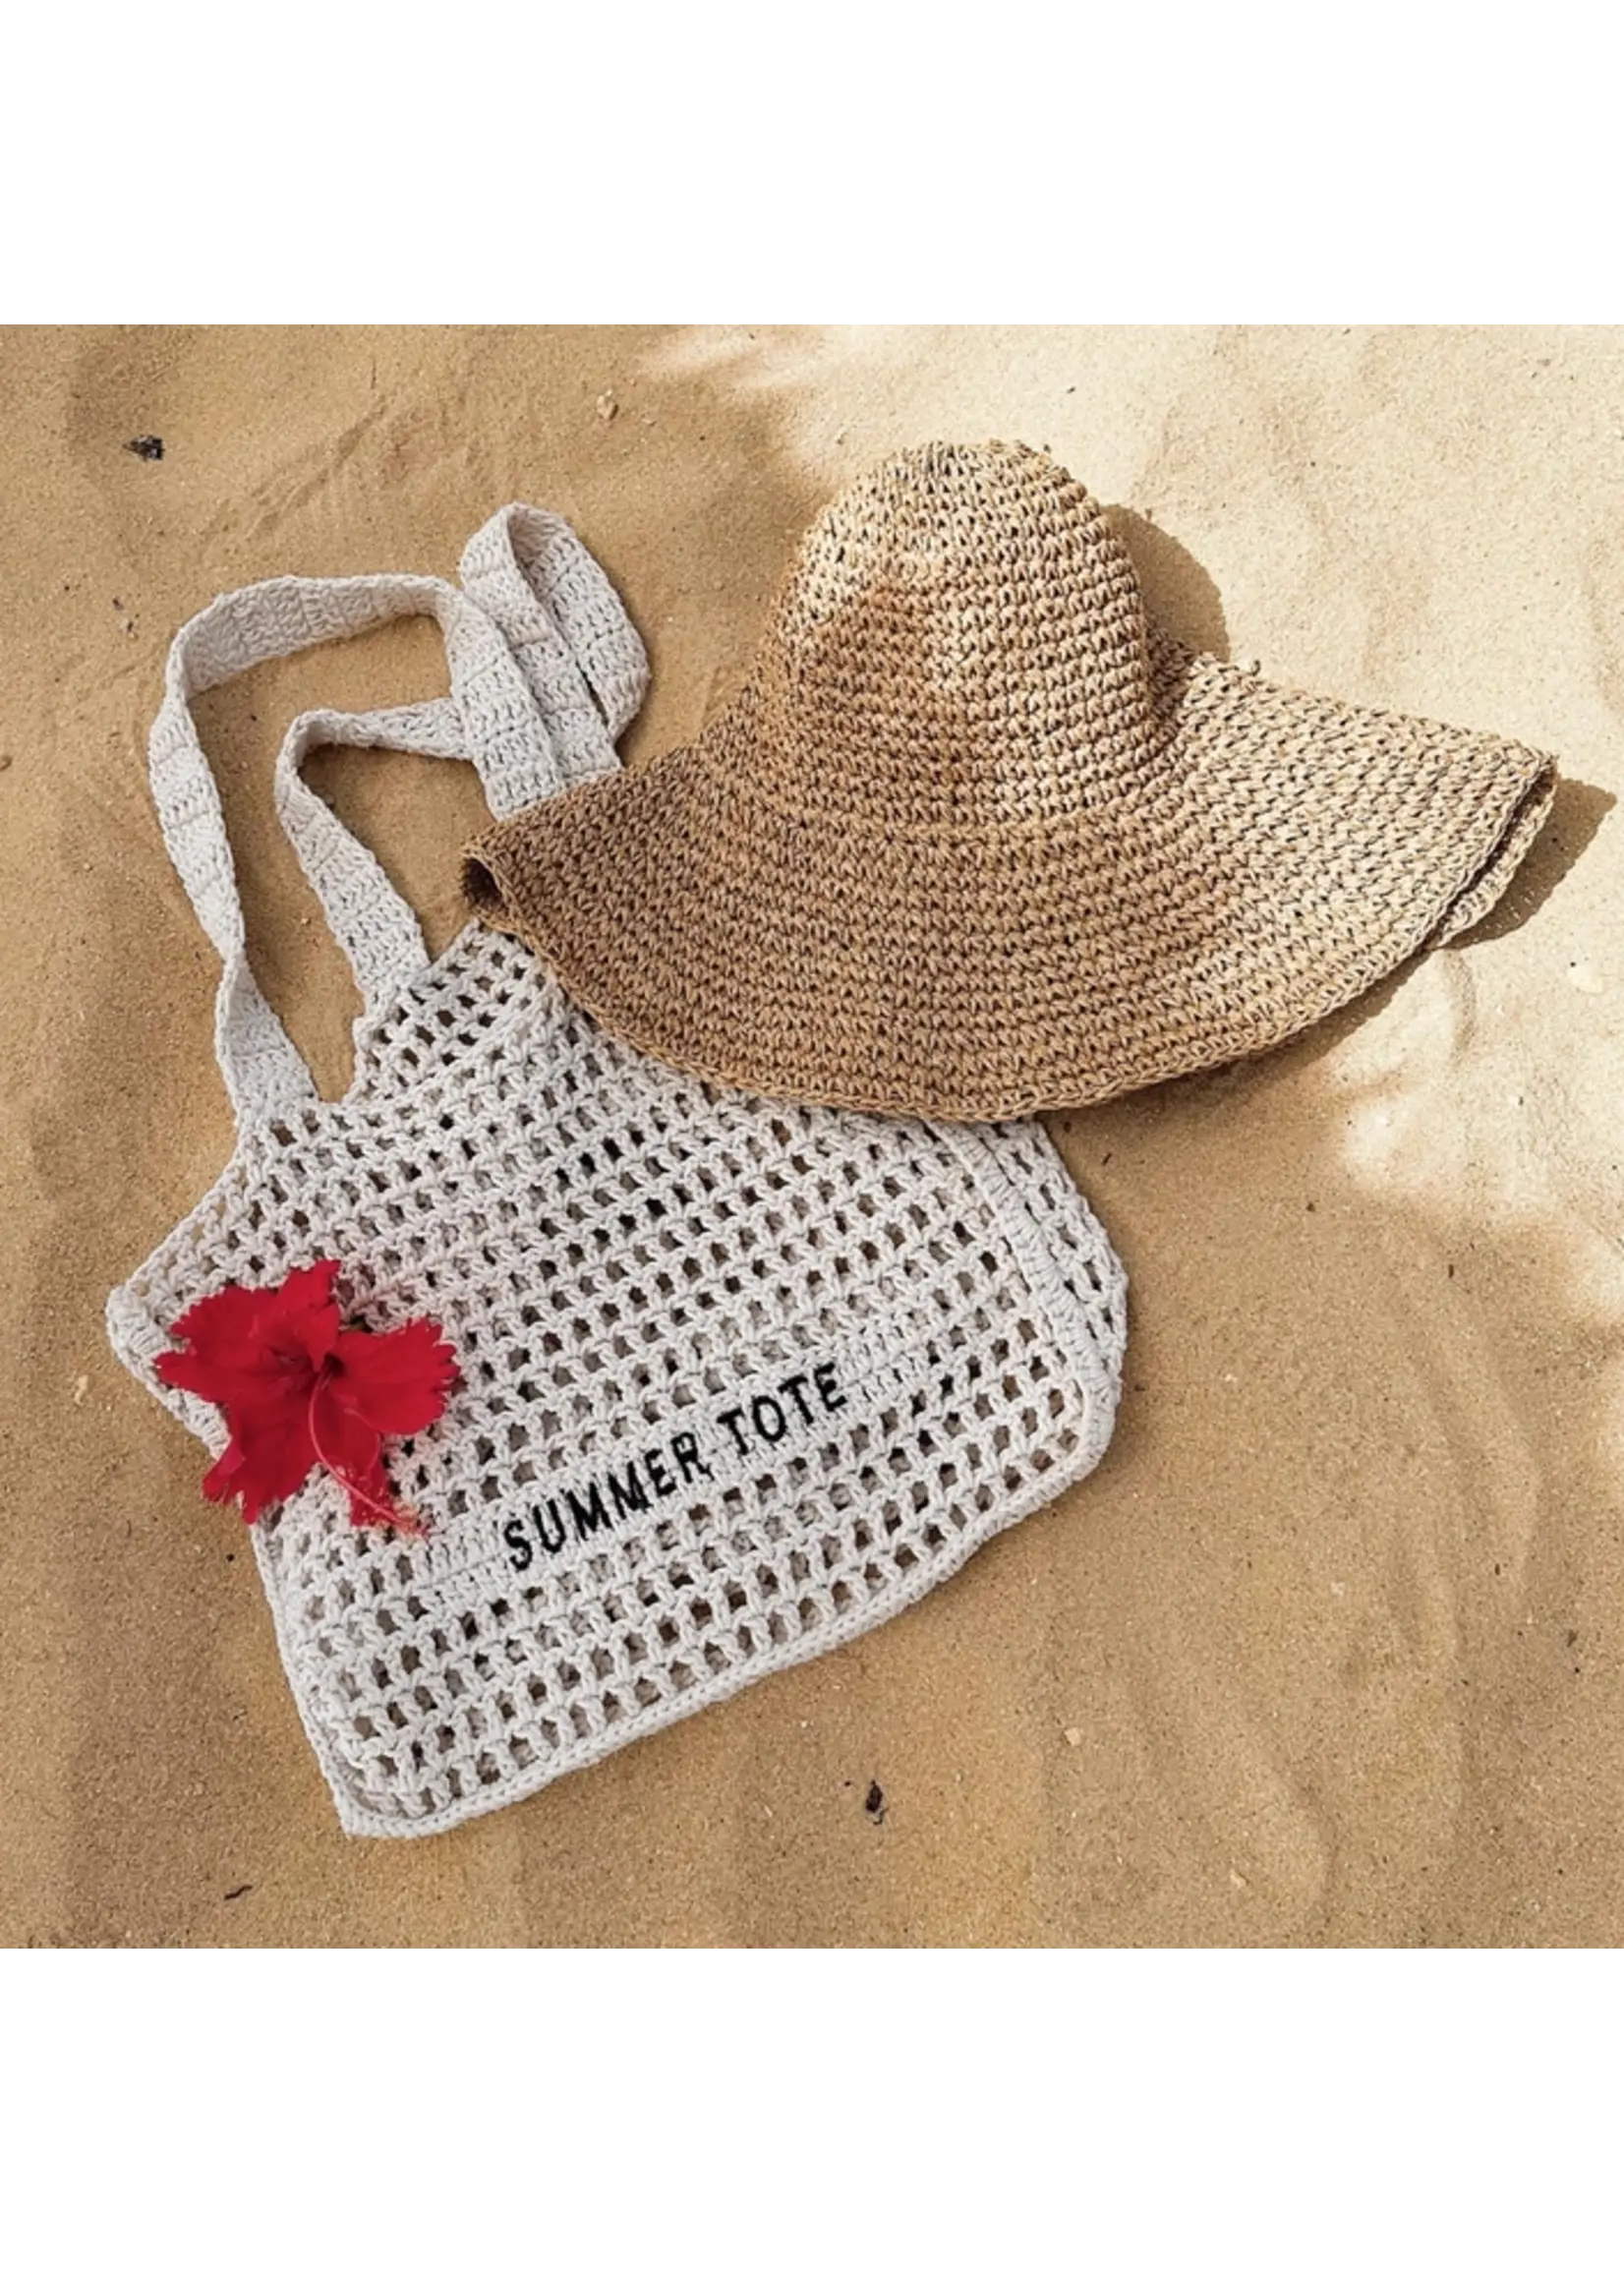 SUMMER TOTE